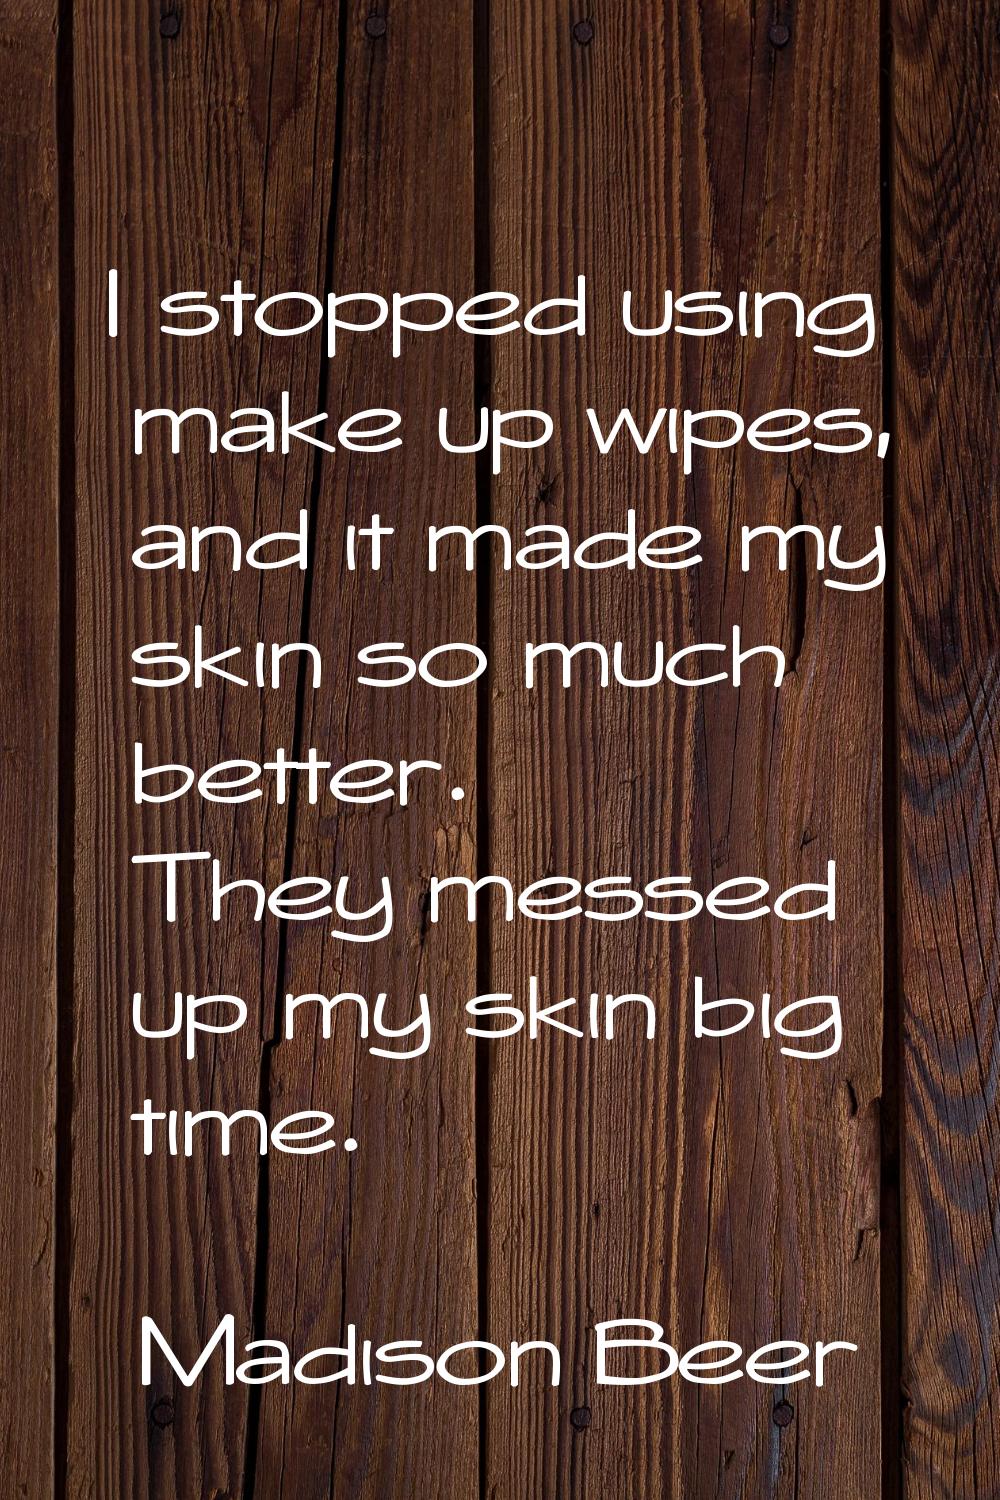 I stopped using make up wipes, and it made my skin so much better. They messed up my skin big time.